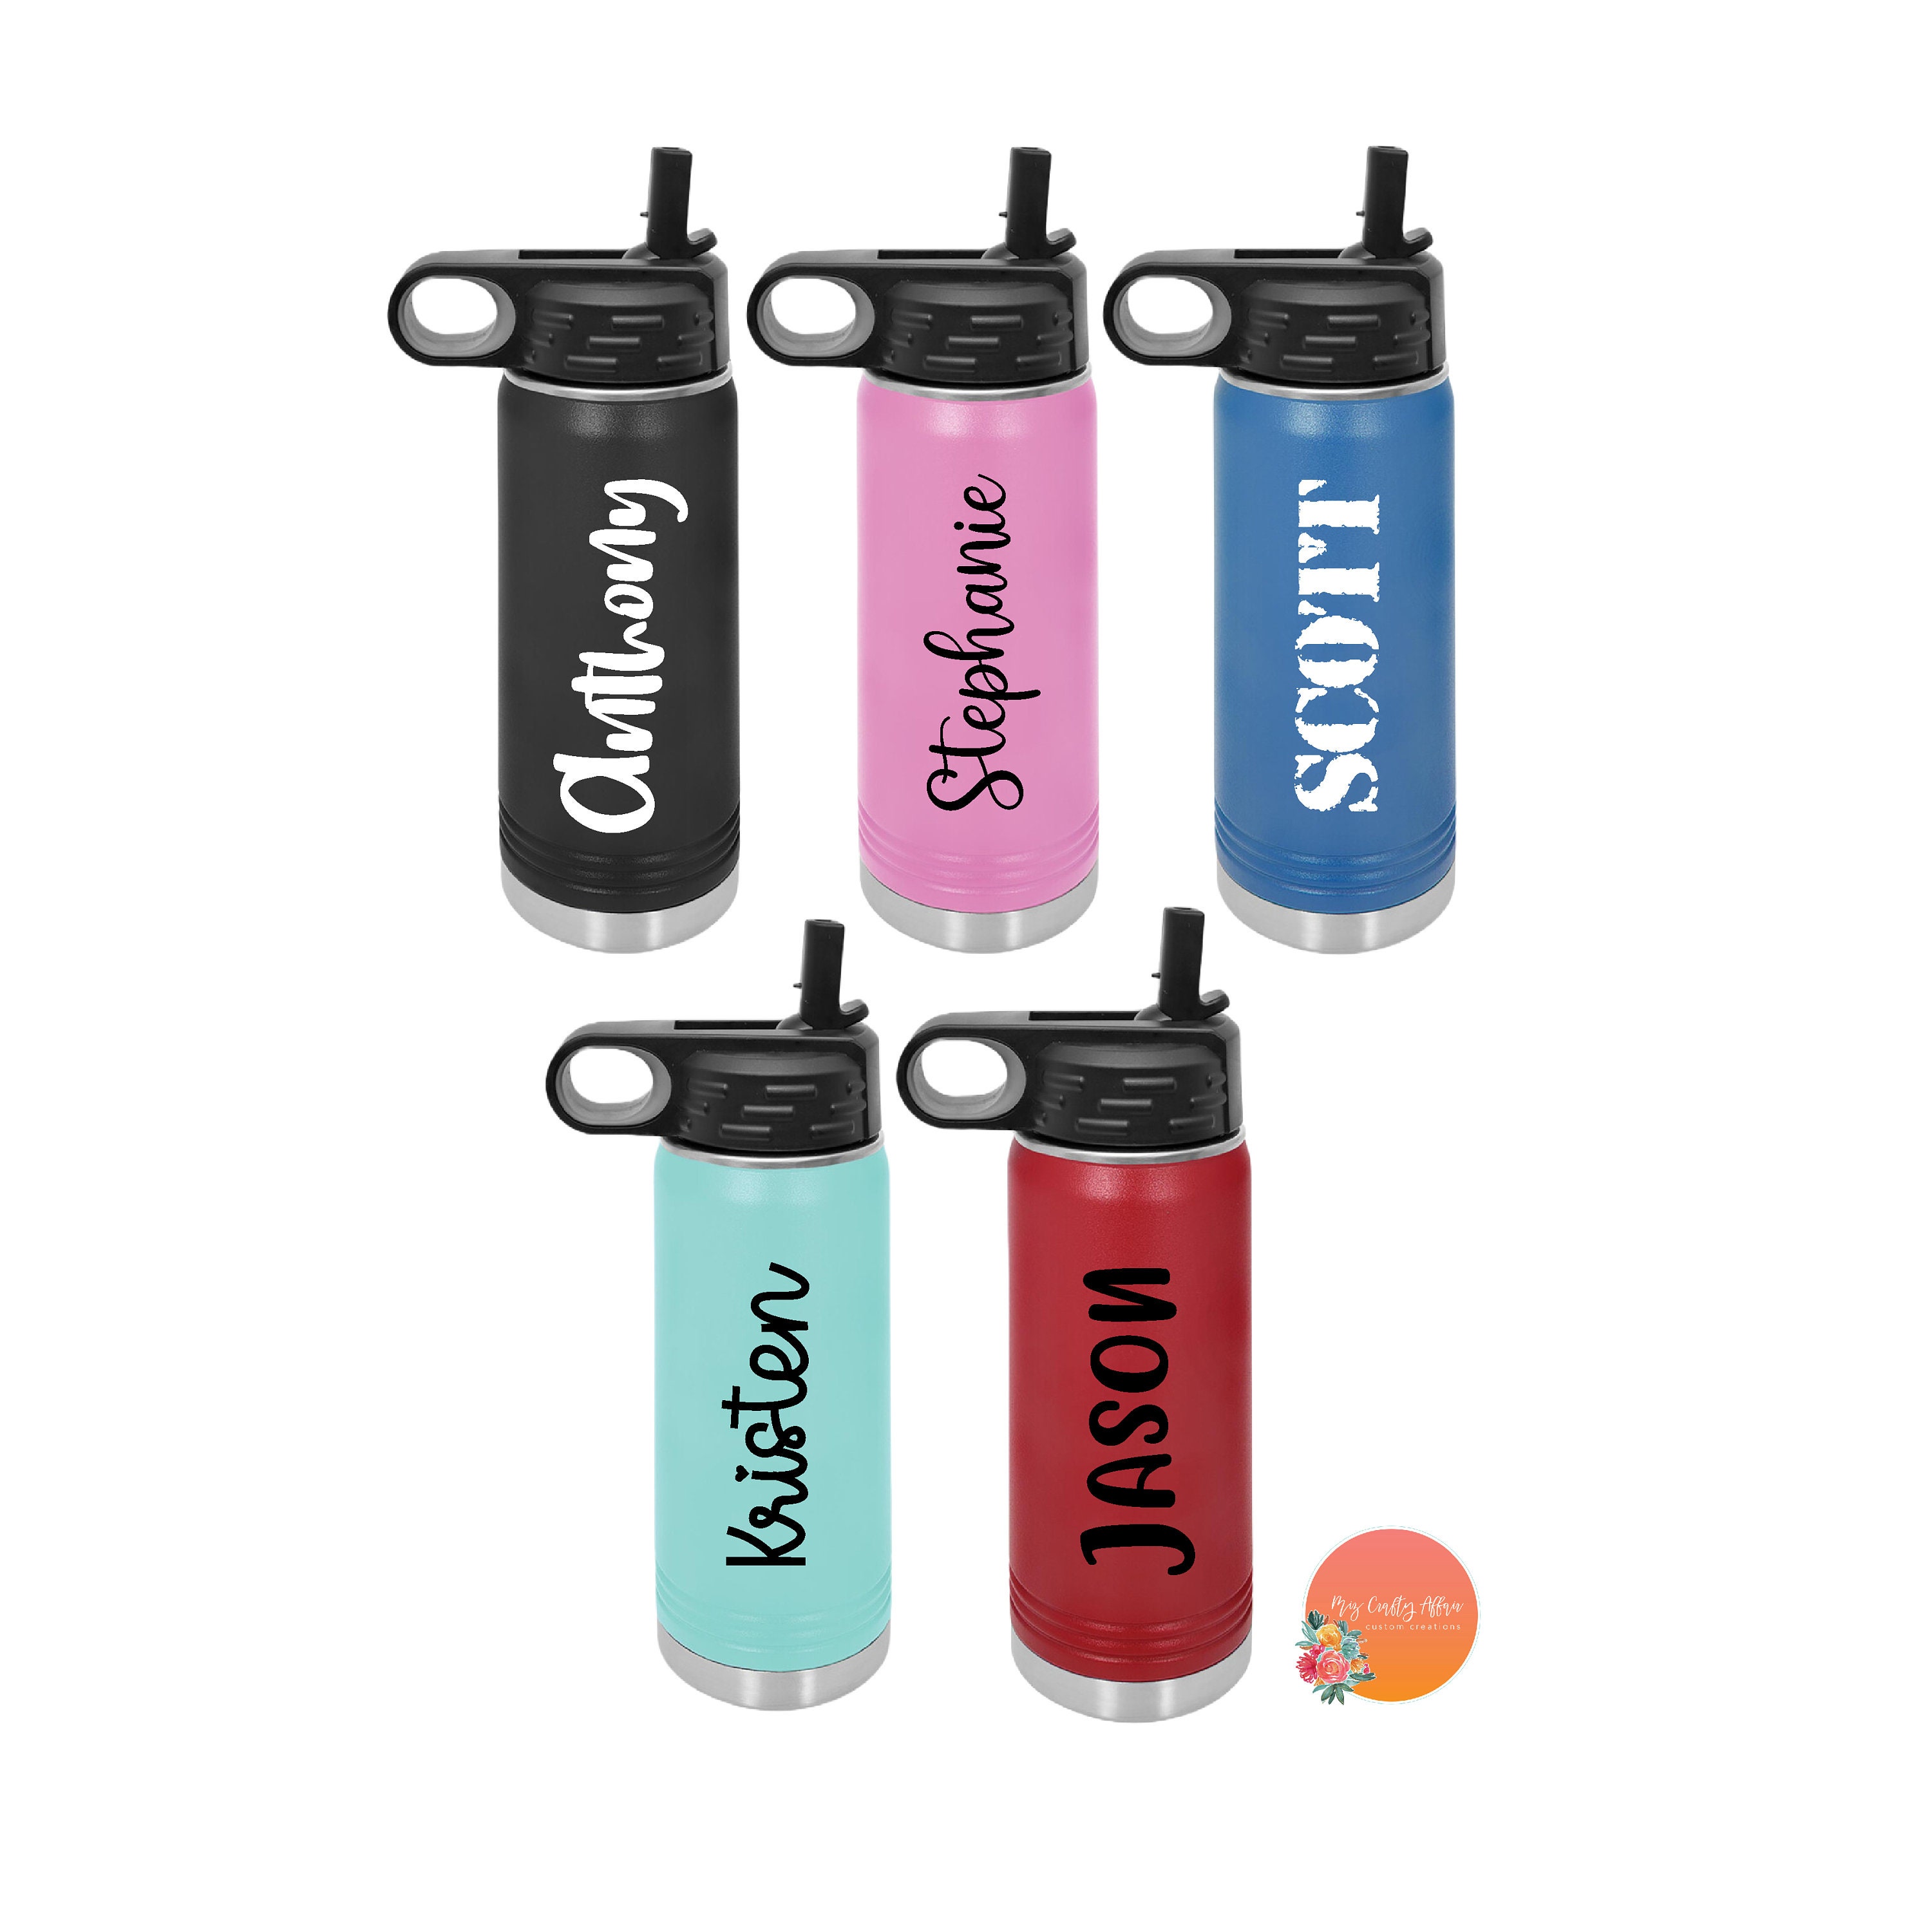 And The Wise One Said - Personalized Hiking Kids Water Bottle